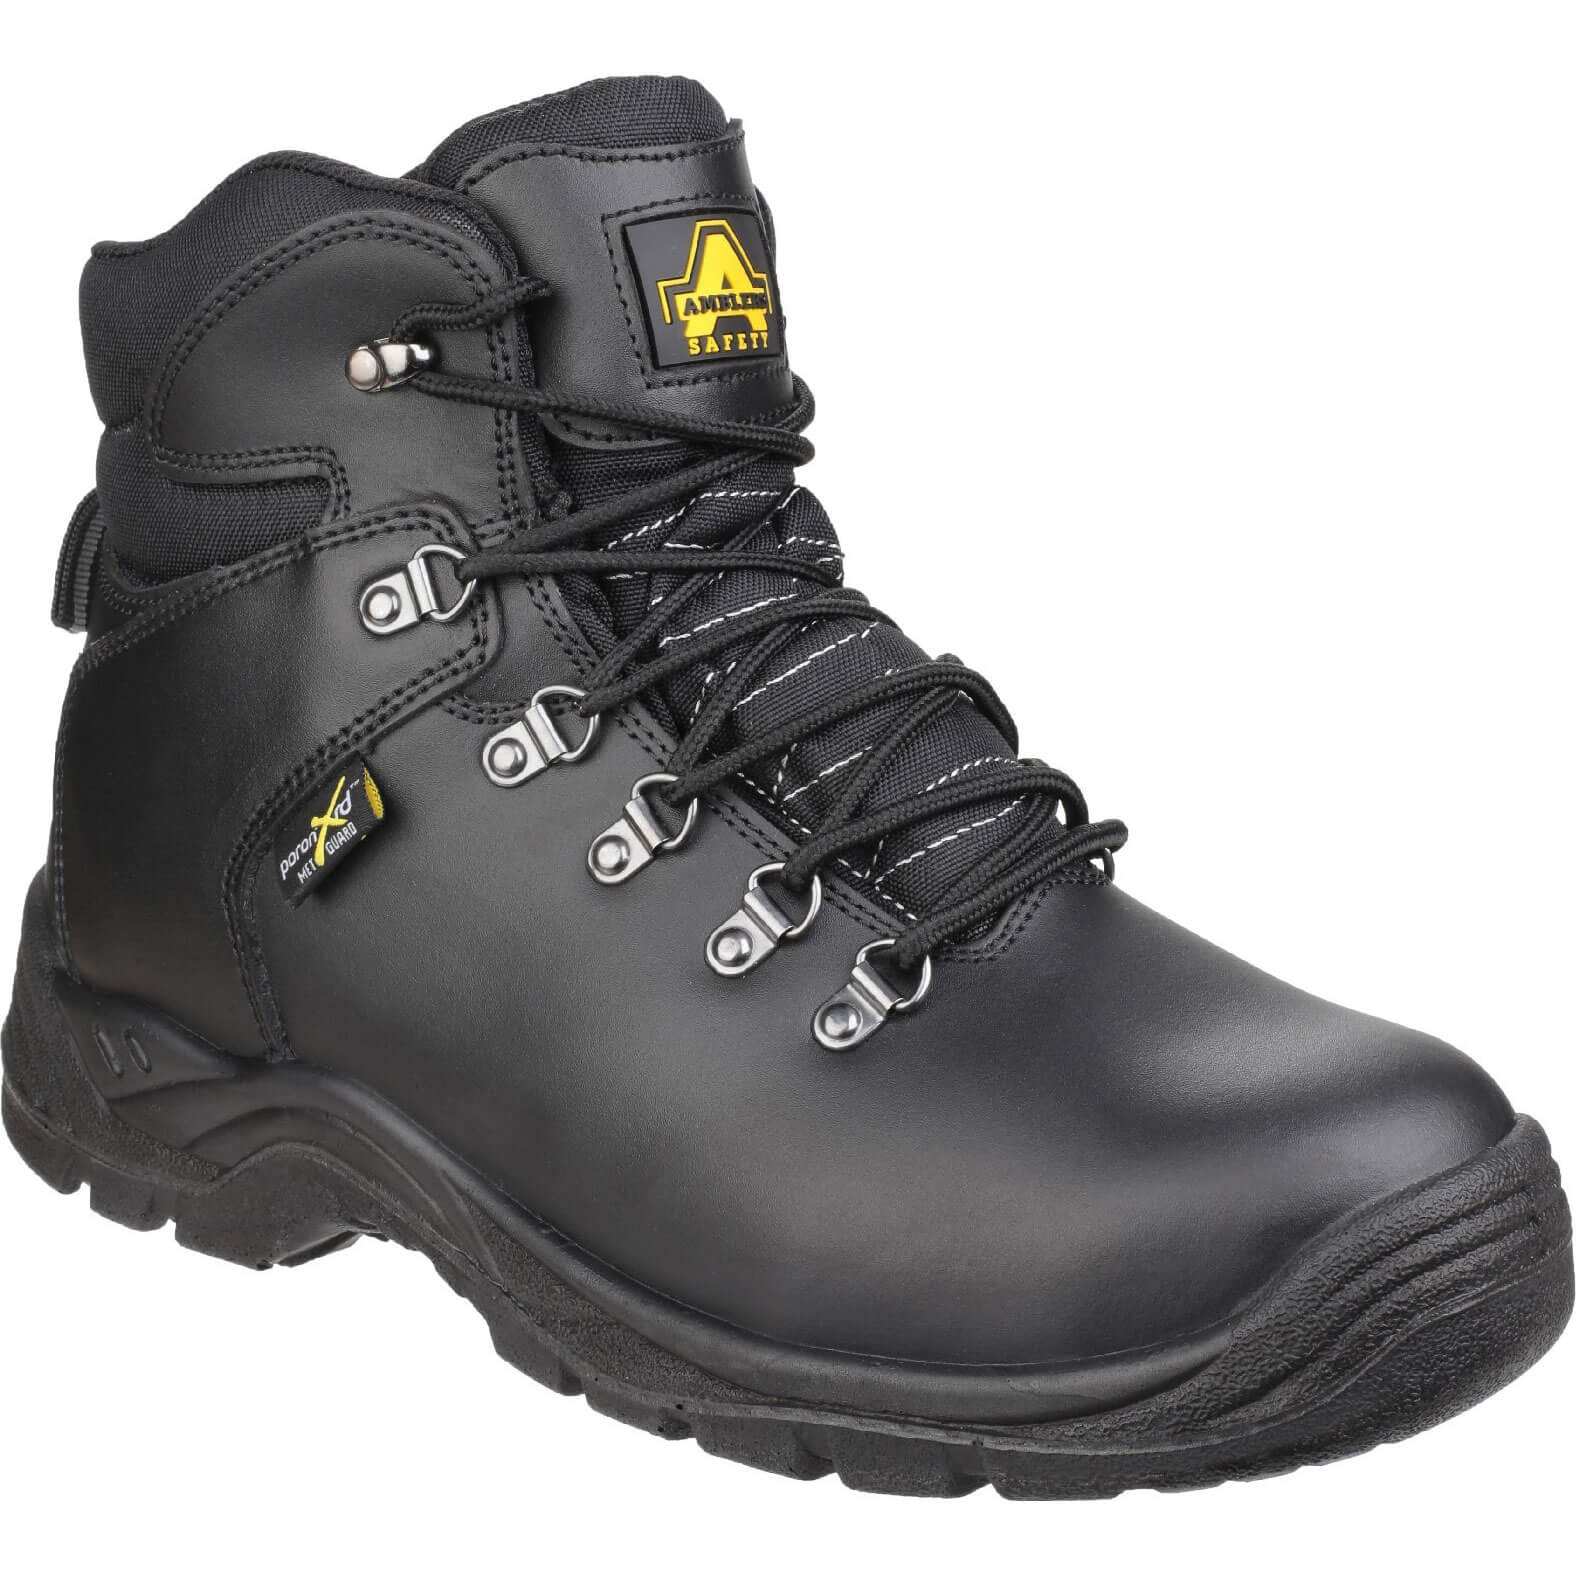 Image of Amblers Mens Safety As335 Poron Xrd Internal Metatarsal Safety Boots Black Size 13